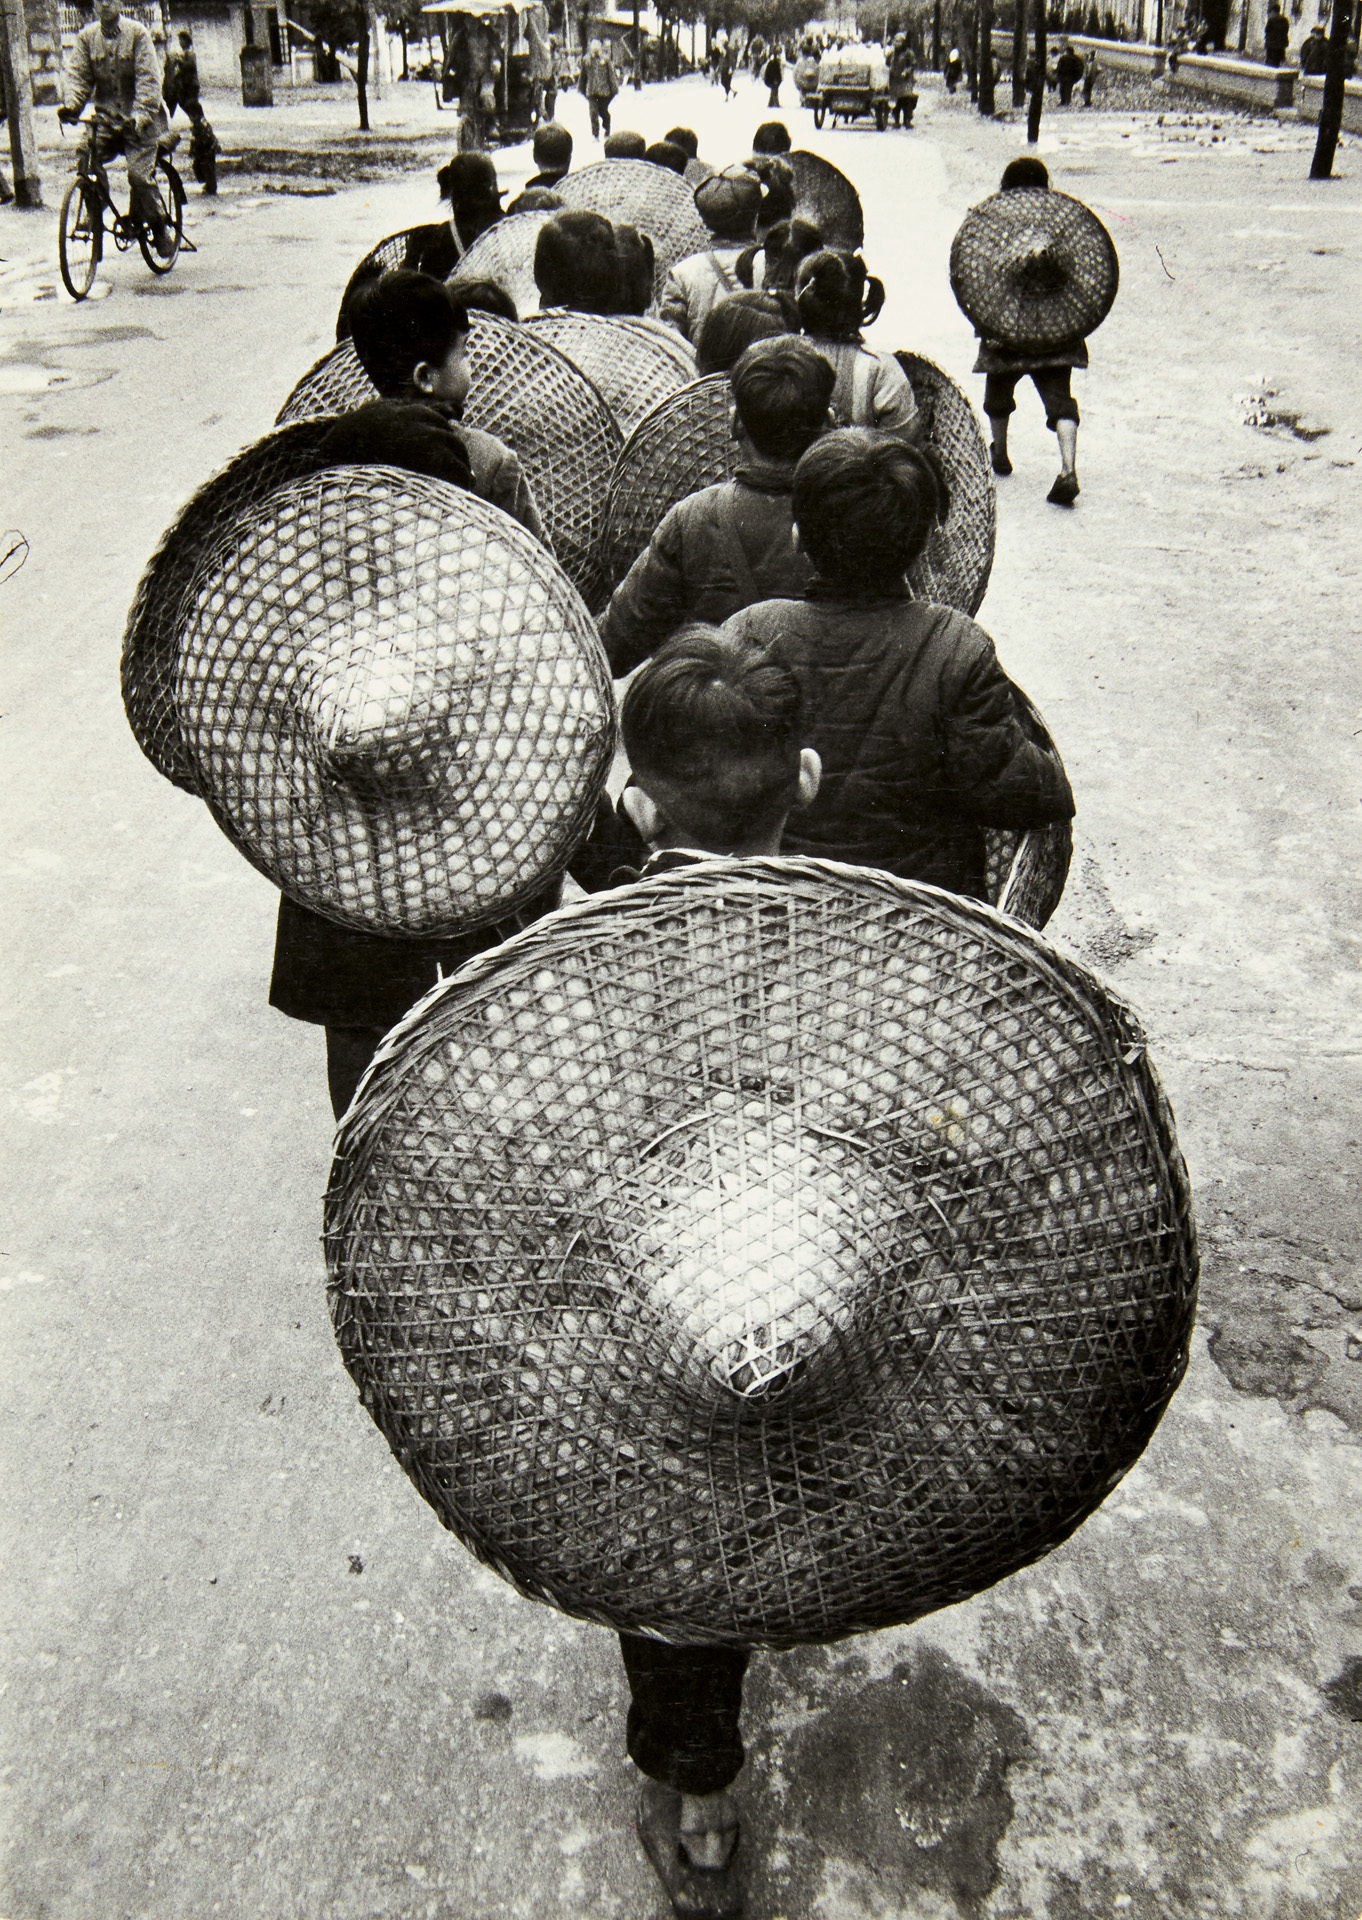 Children on their way to school, Guangxi Province 1965